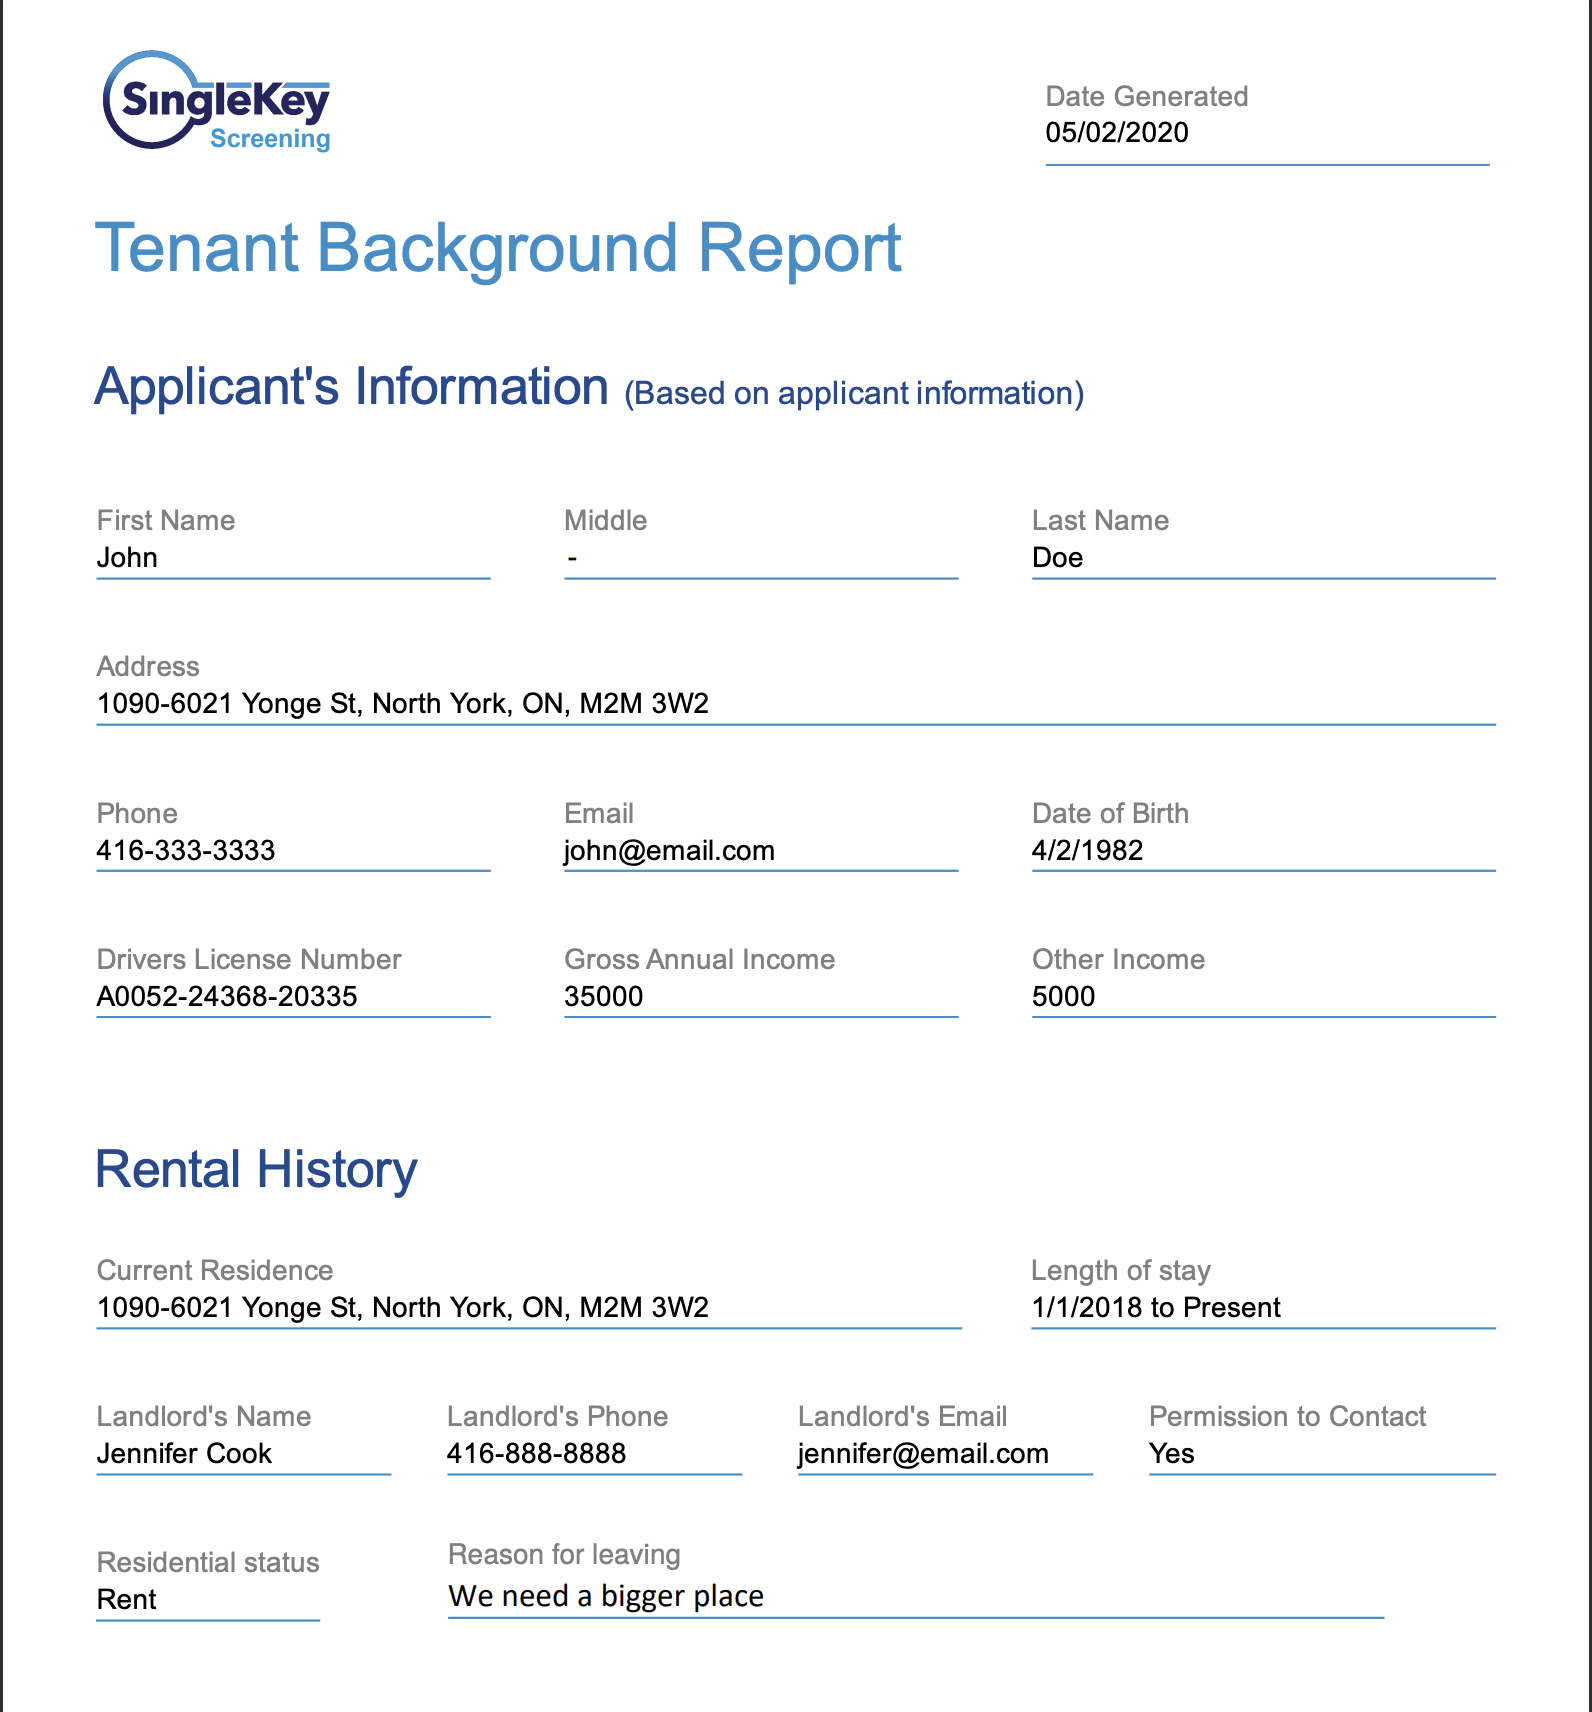 Tenant Background Report